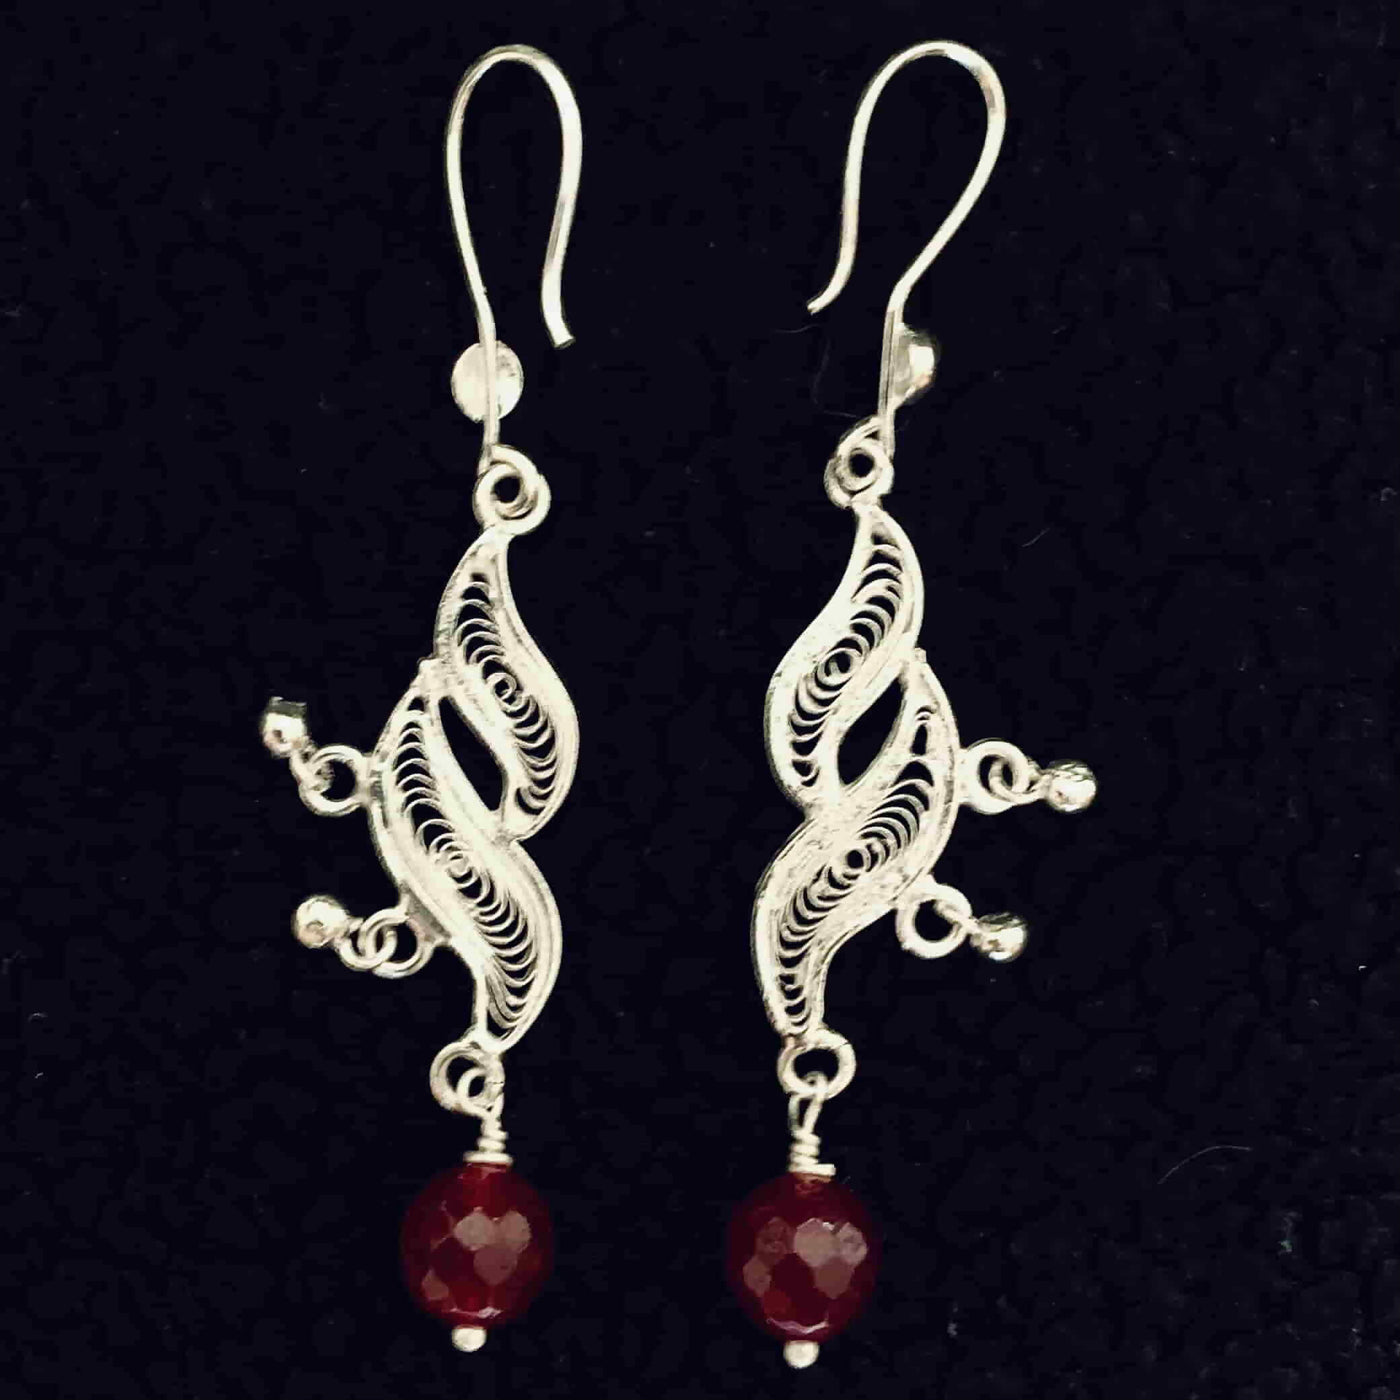 Seahorse - Silver Filigree Earring with beads SJ-965 - Fashion & Lifestyle - 1